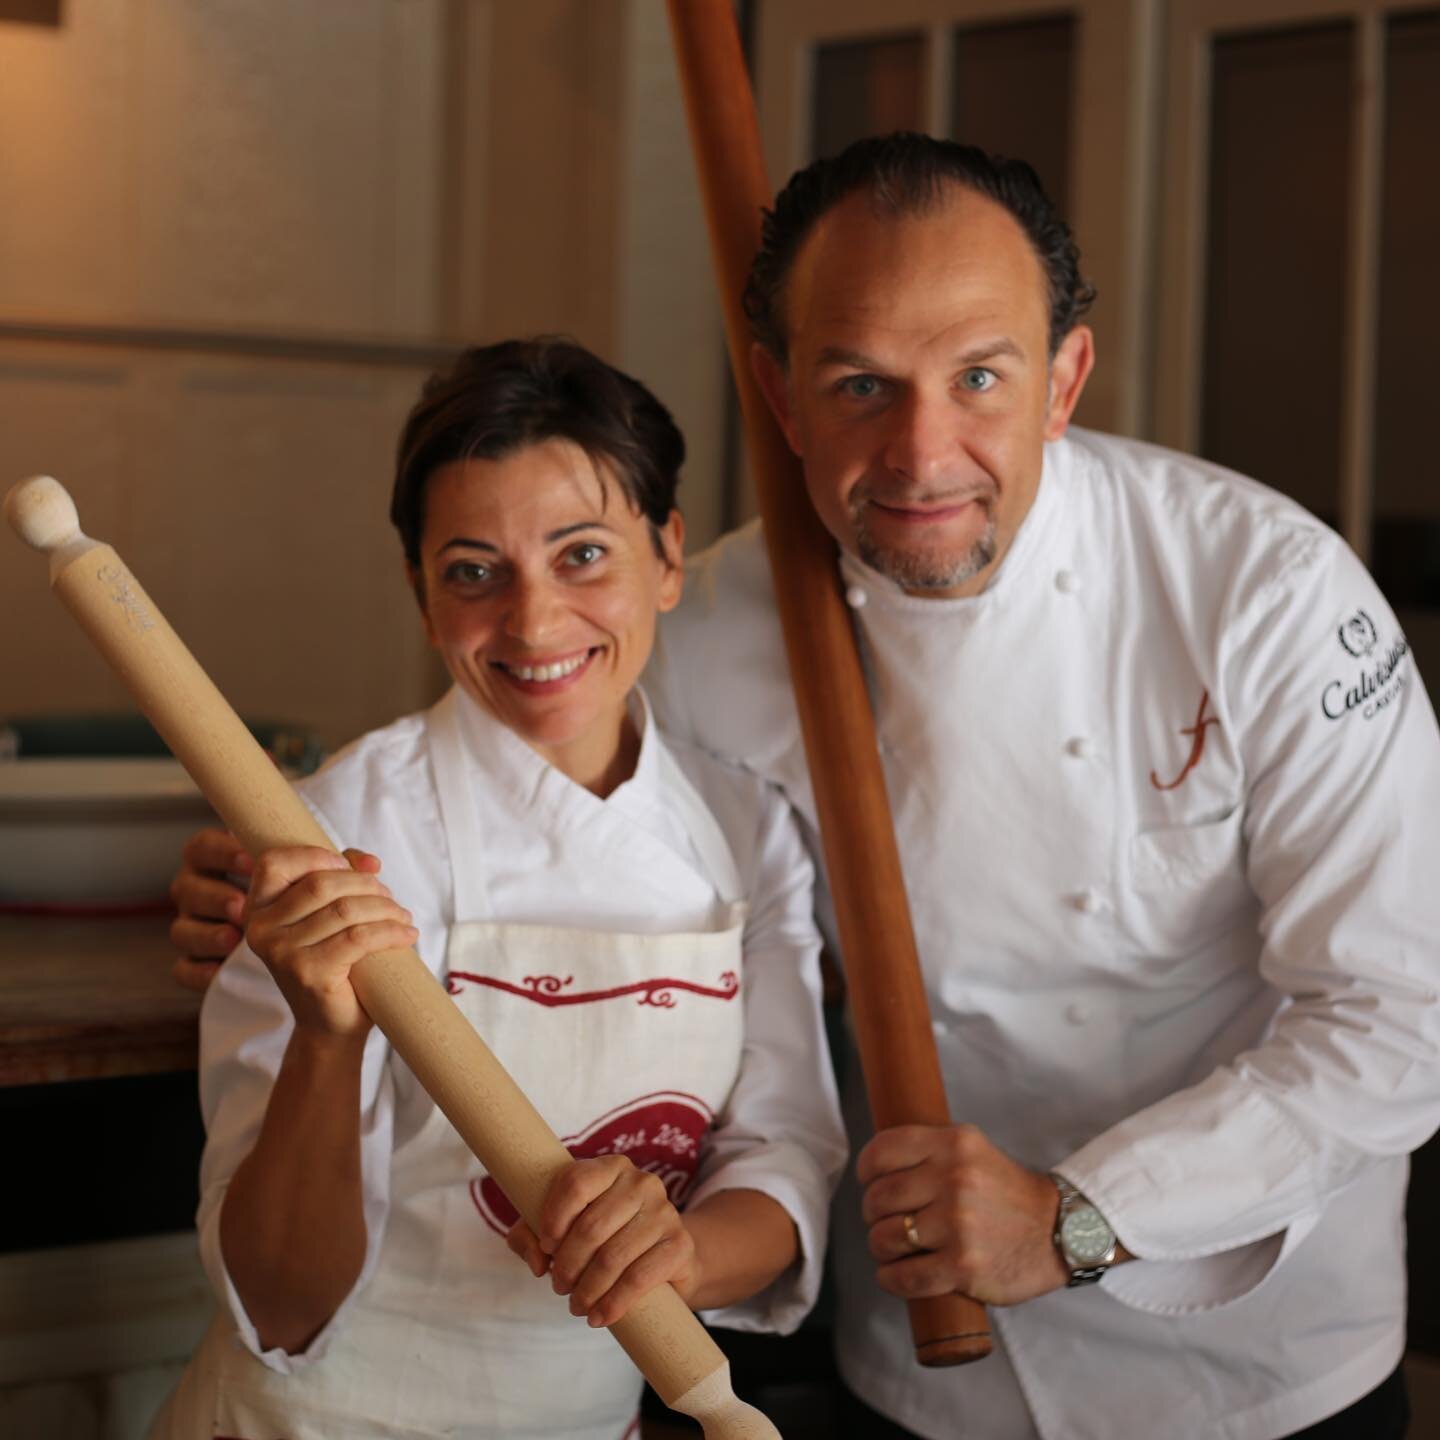 Chef @fabiotrabocchi&rsquo;s earliest food memories are filled with time spent making pasta with his father, Giuseppe, and the &ldquo;sfogline&rdquo;, the women who spent all day hand making pasta in Italy. Now, he wants to share that feeling with @c